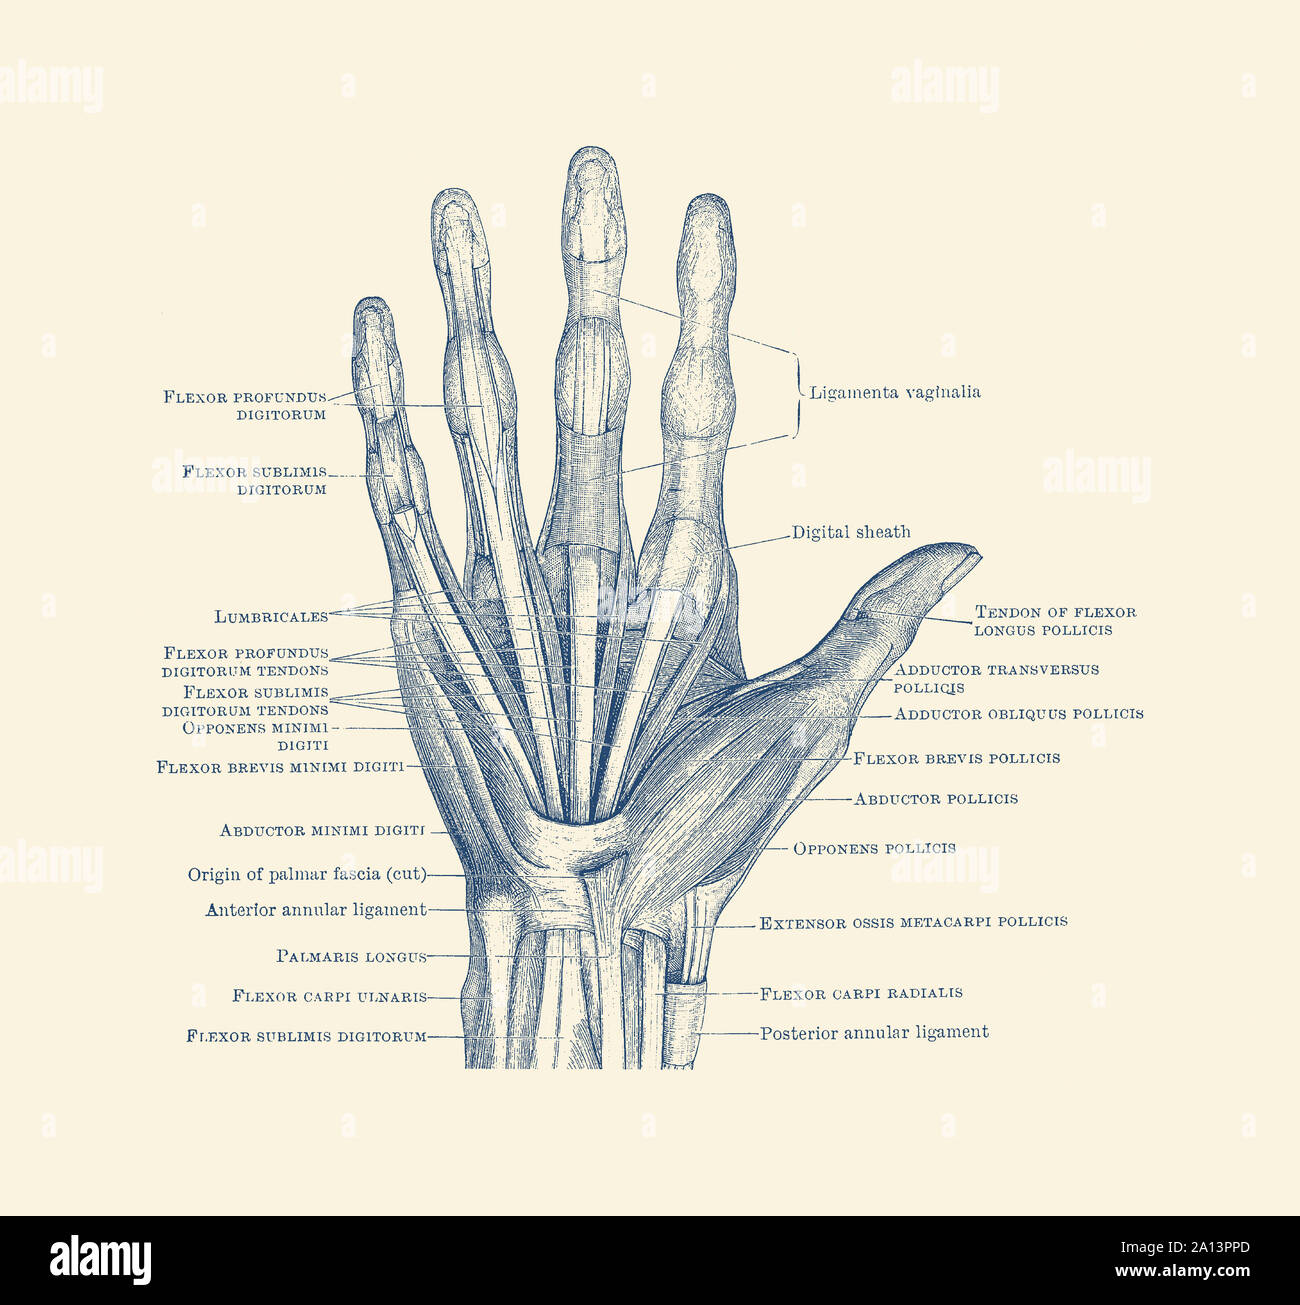 Diagram depicting the bones, ligaments and muscles throughout the hand and fingers. Stock Photo